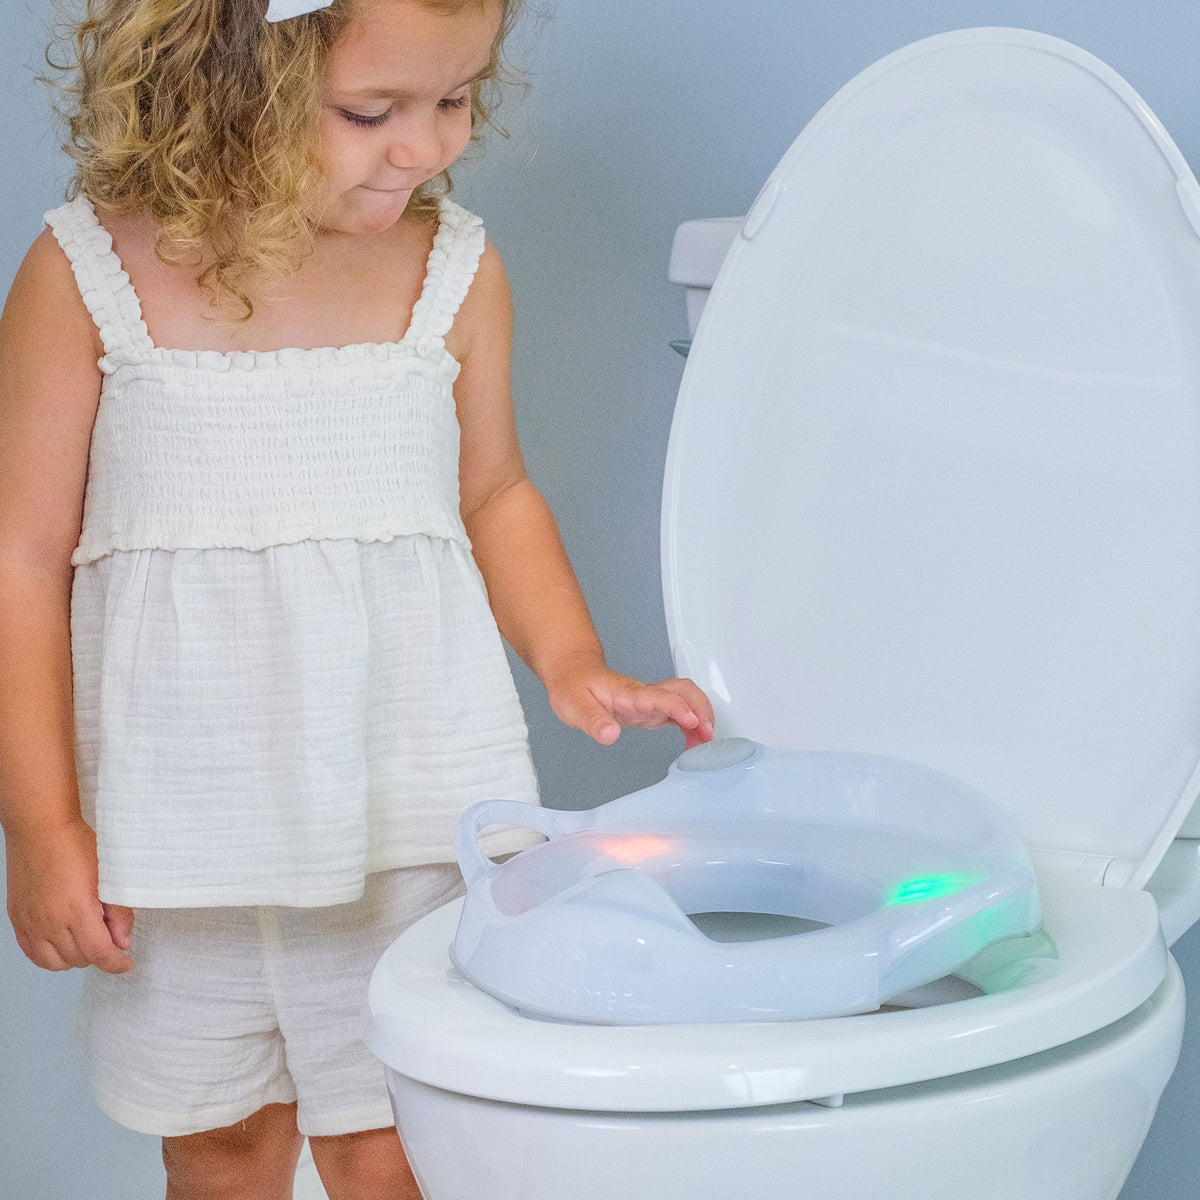 Riduttore WC Sonoro MY POTTY RING LIGHT & SOUNDS Summer Infant con